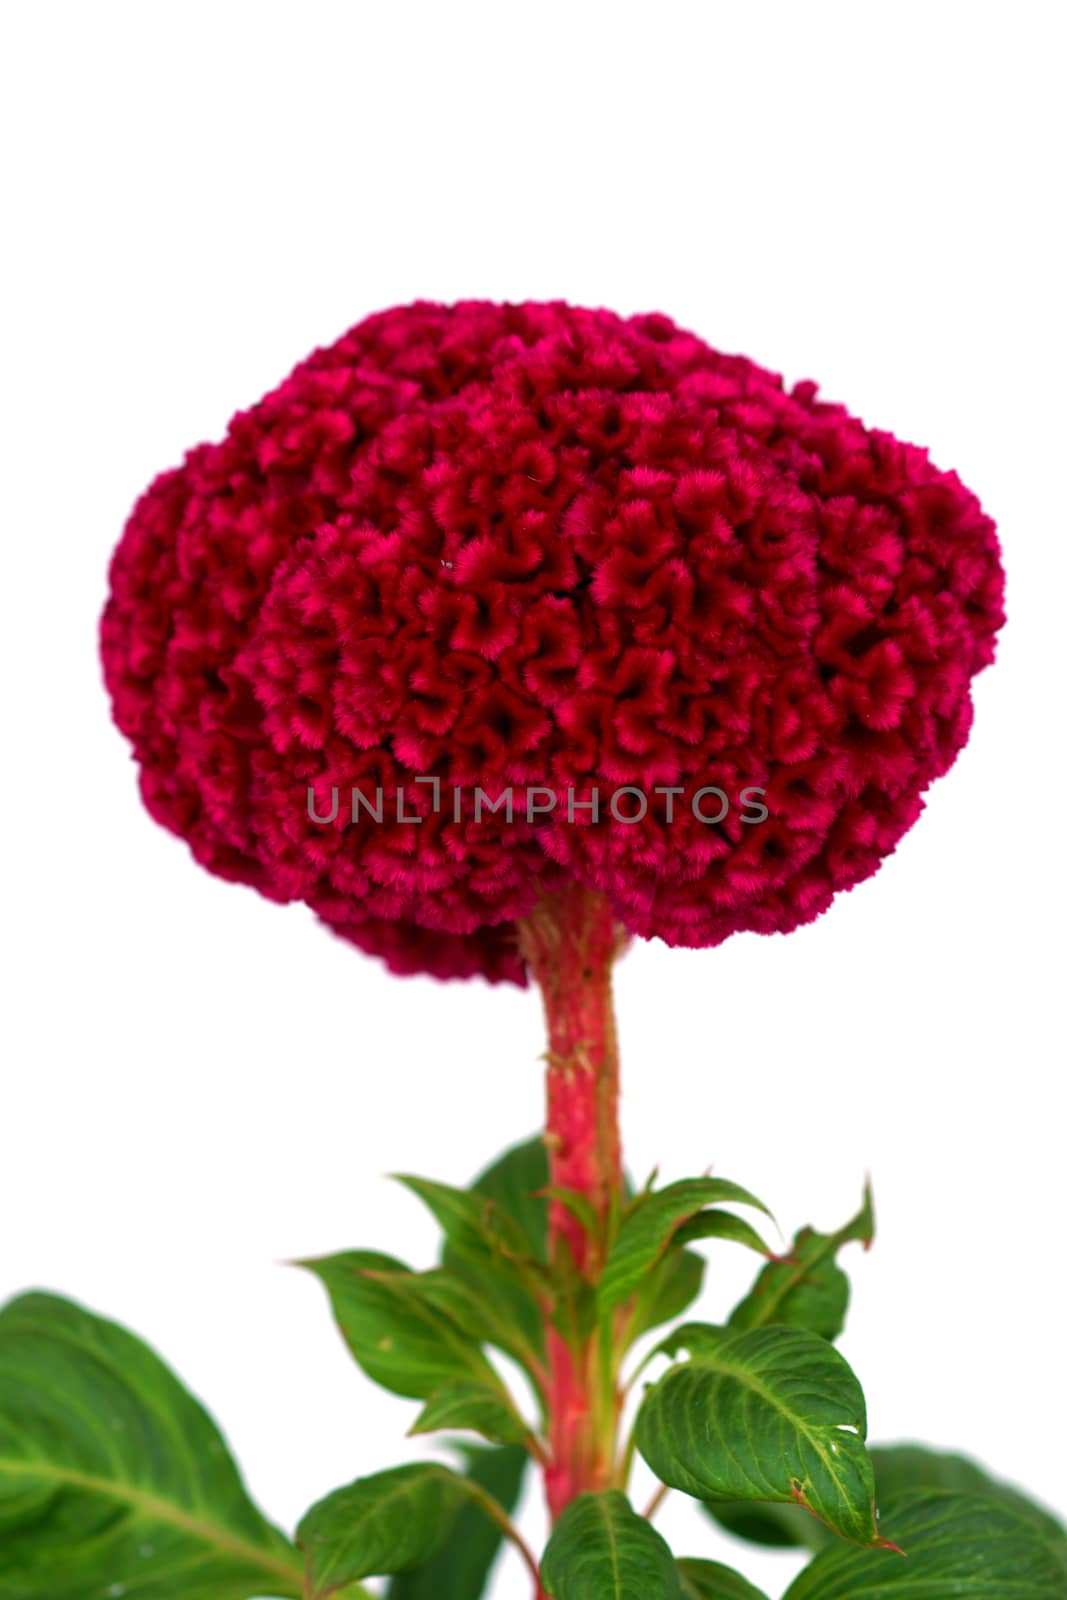 Cockscomb, Chinese Wool Flower by Noppharat_th